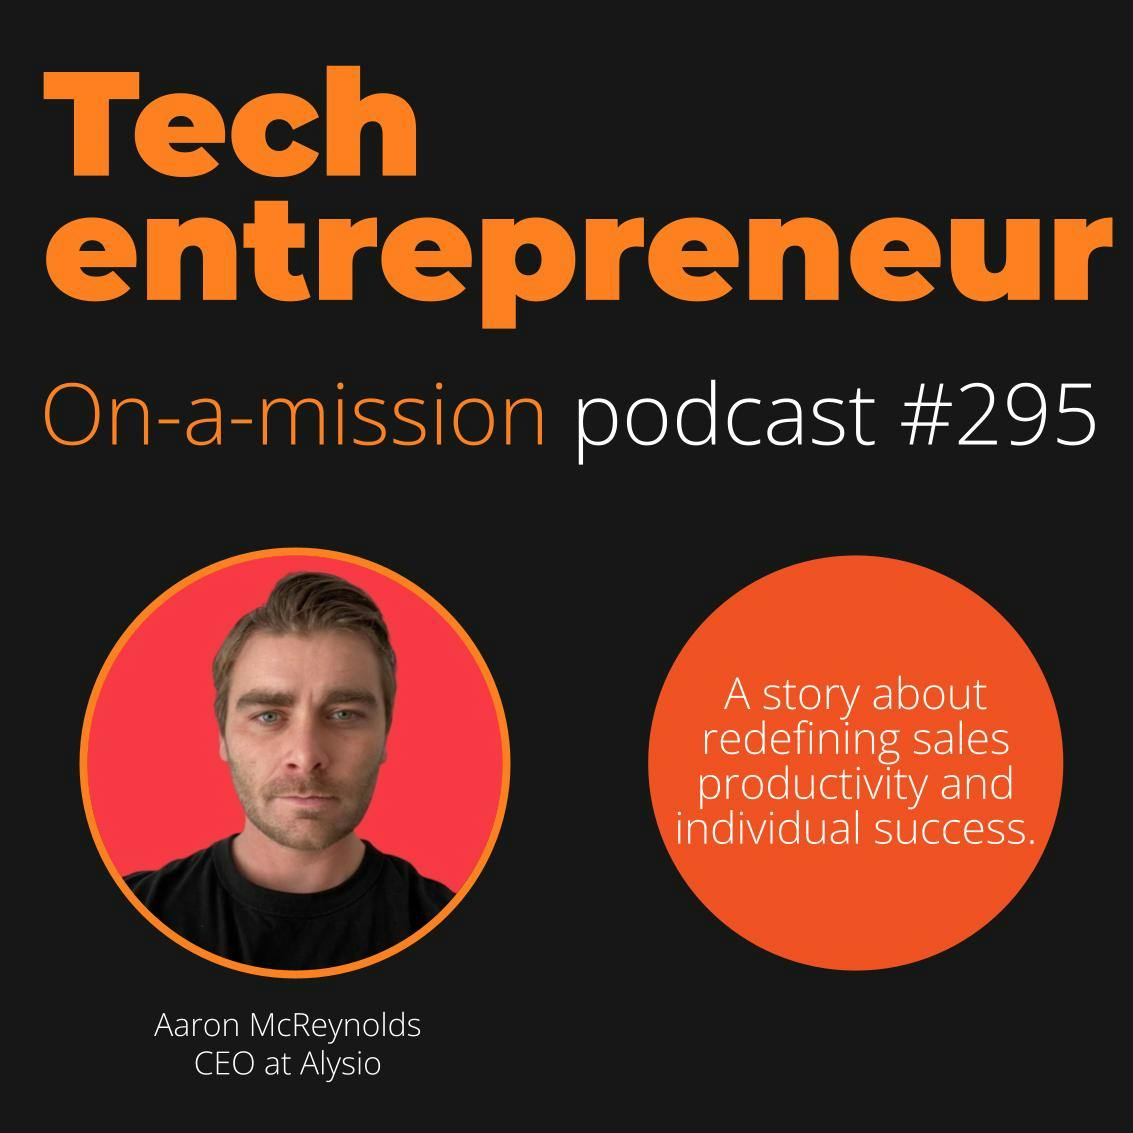 #295 - Aaron McReynolds, CEO of Alysio - on competitive drive to fuel Sales innovation.